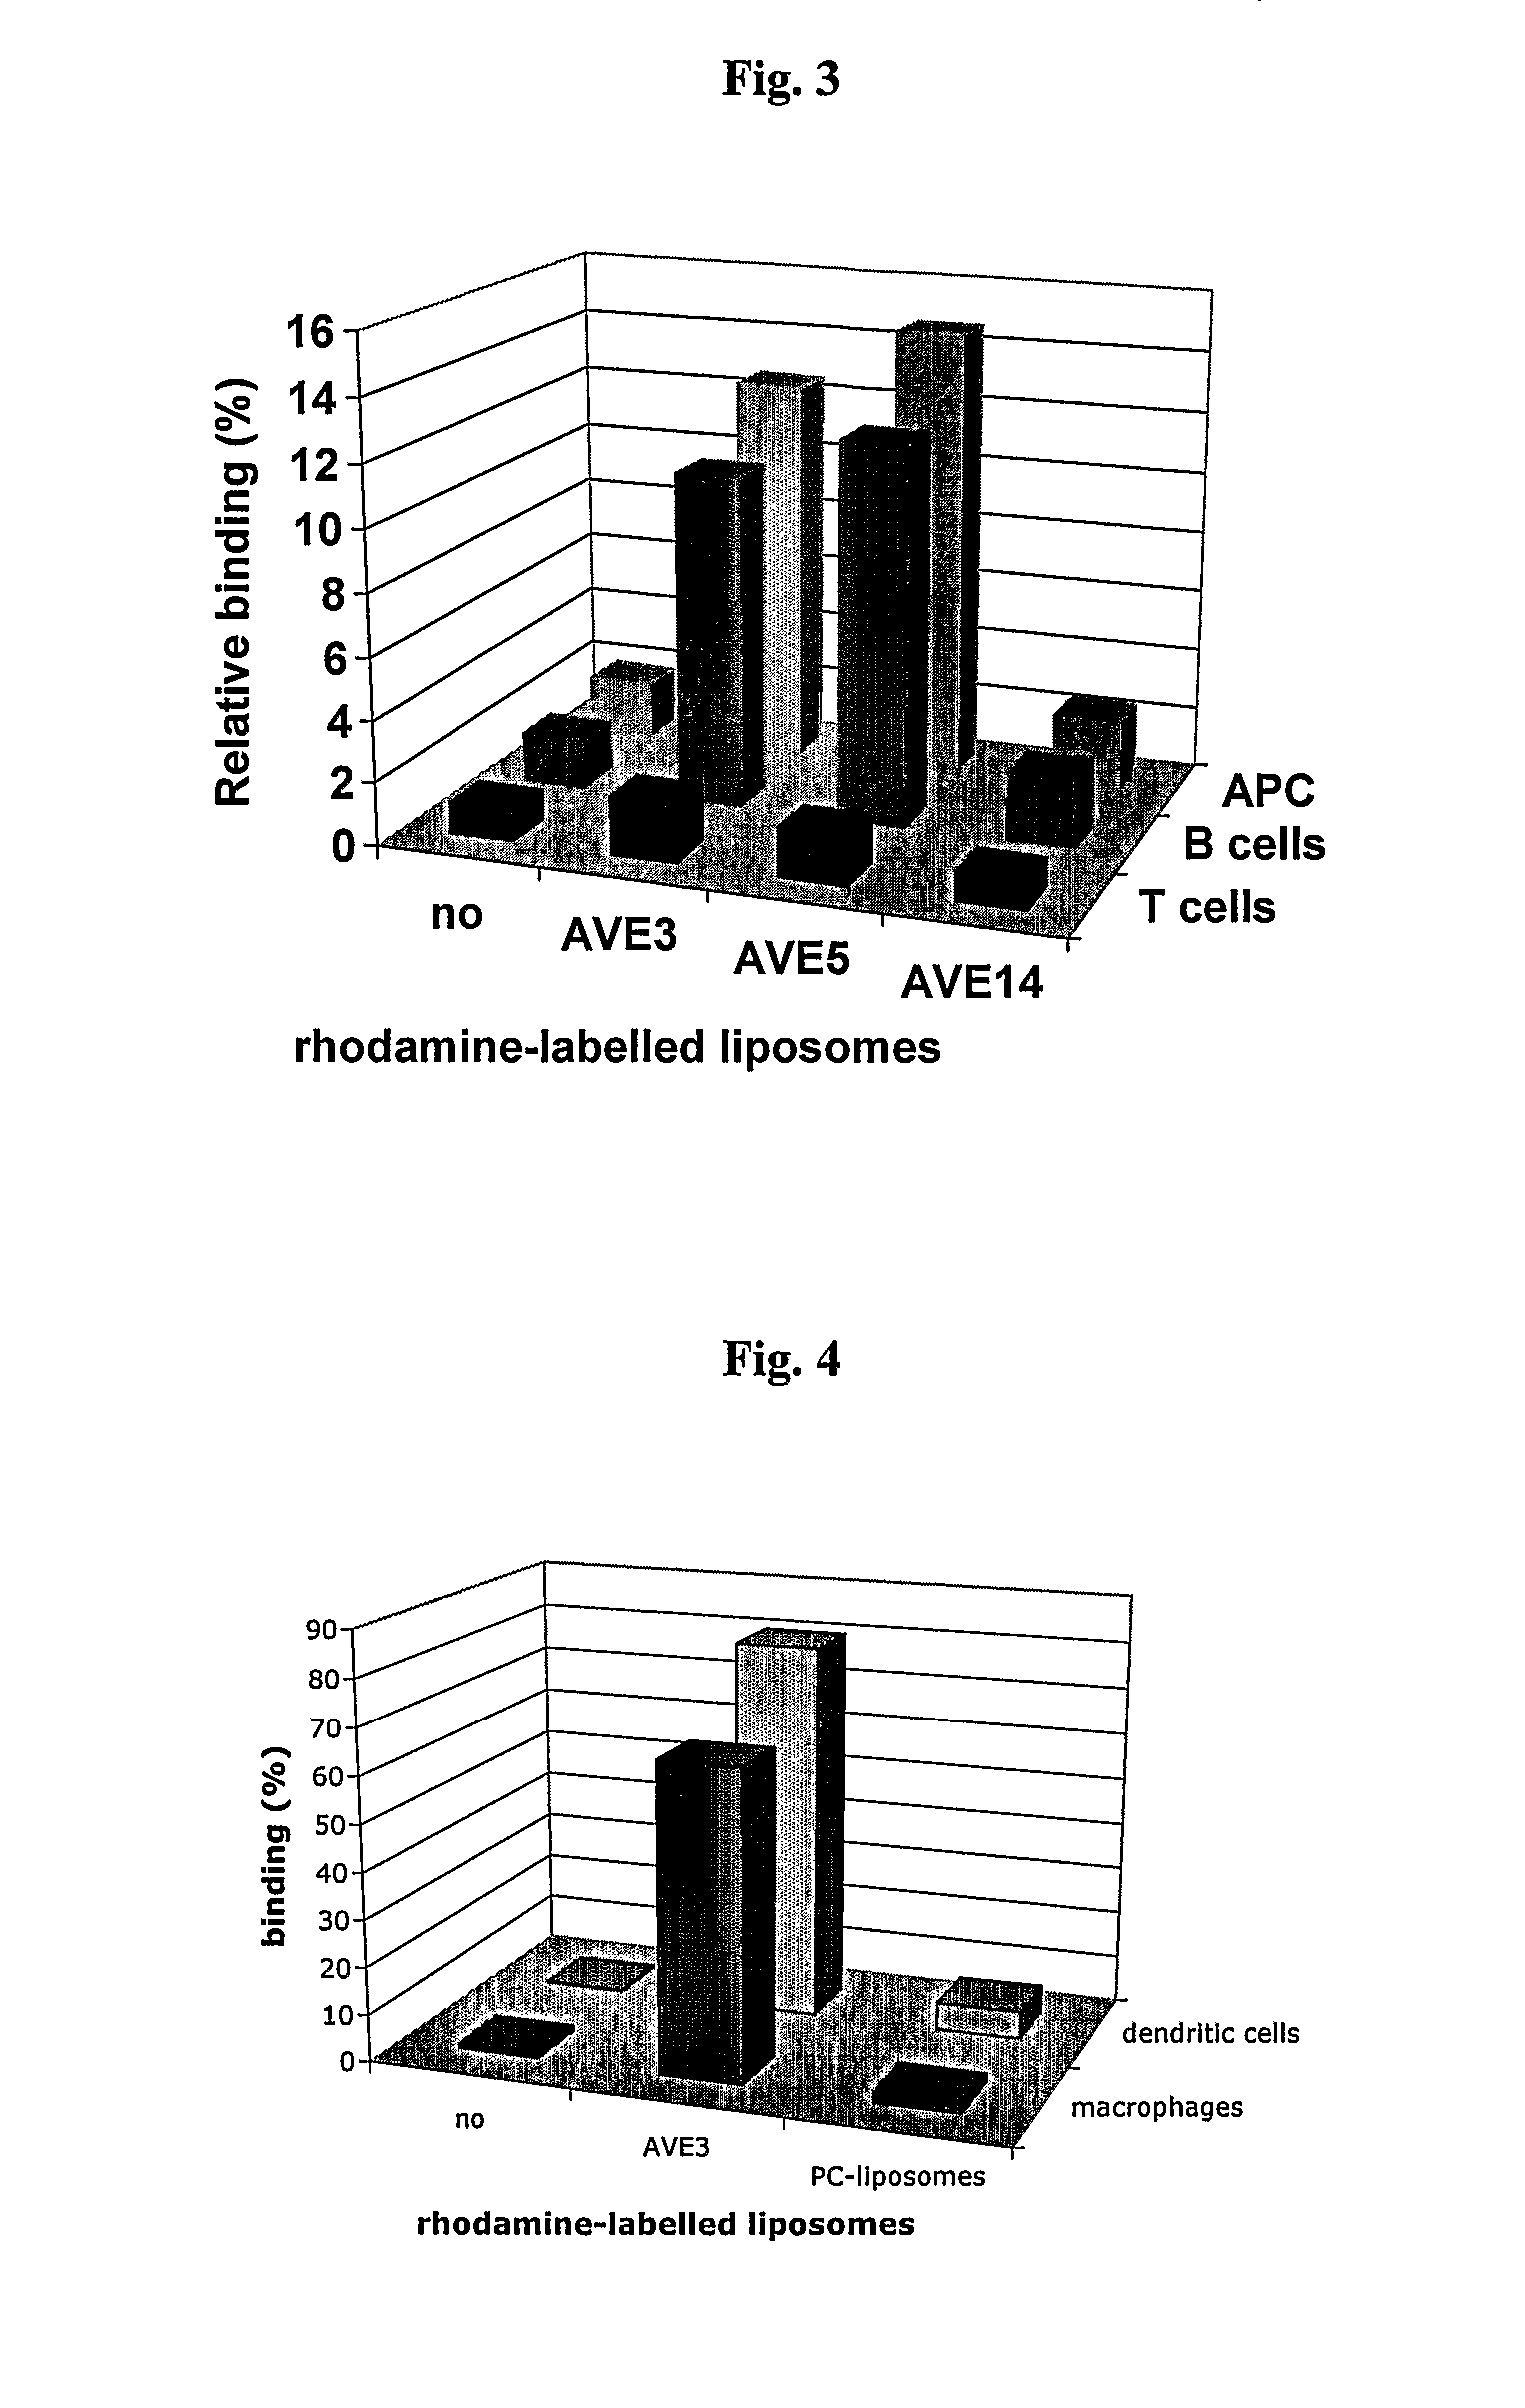 Liposomes and liposomal compositions for vaccination and drug delivery